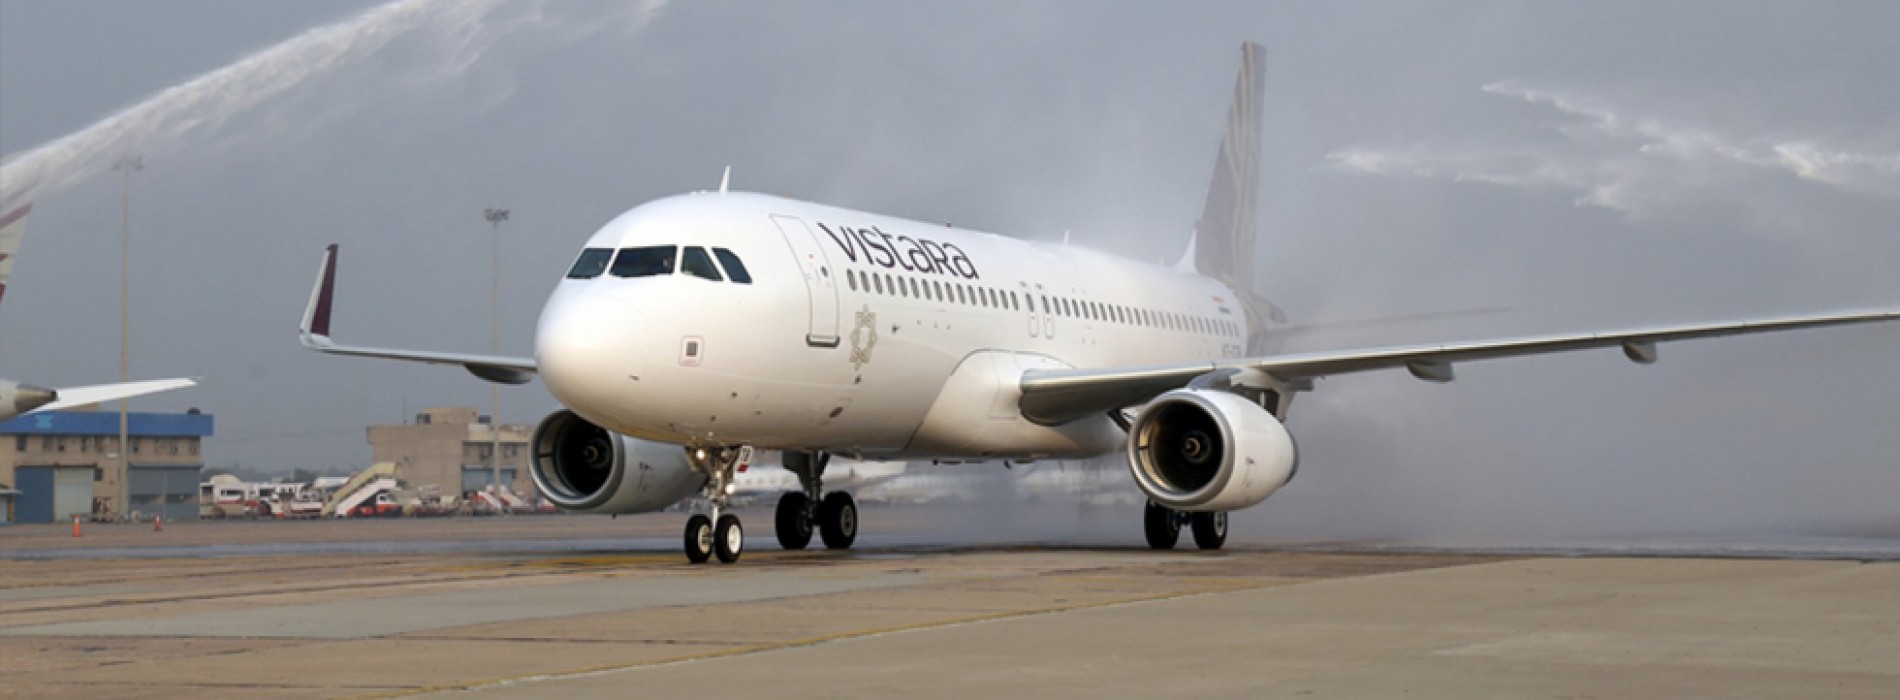 Vistara plans overseas flights to tap rising global travel from India